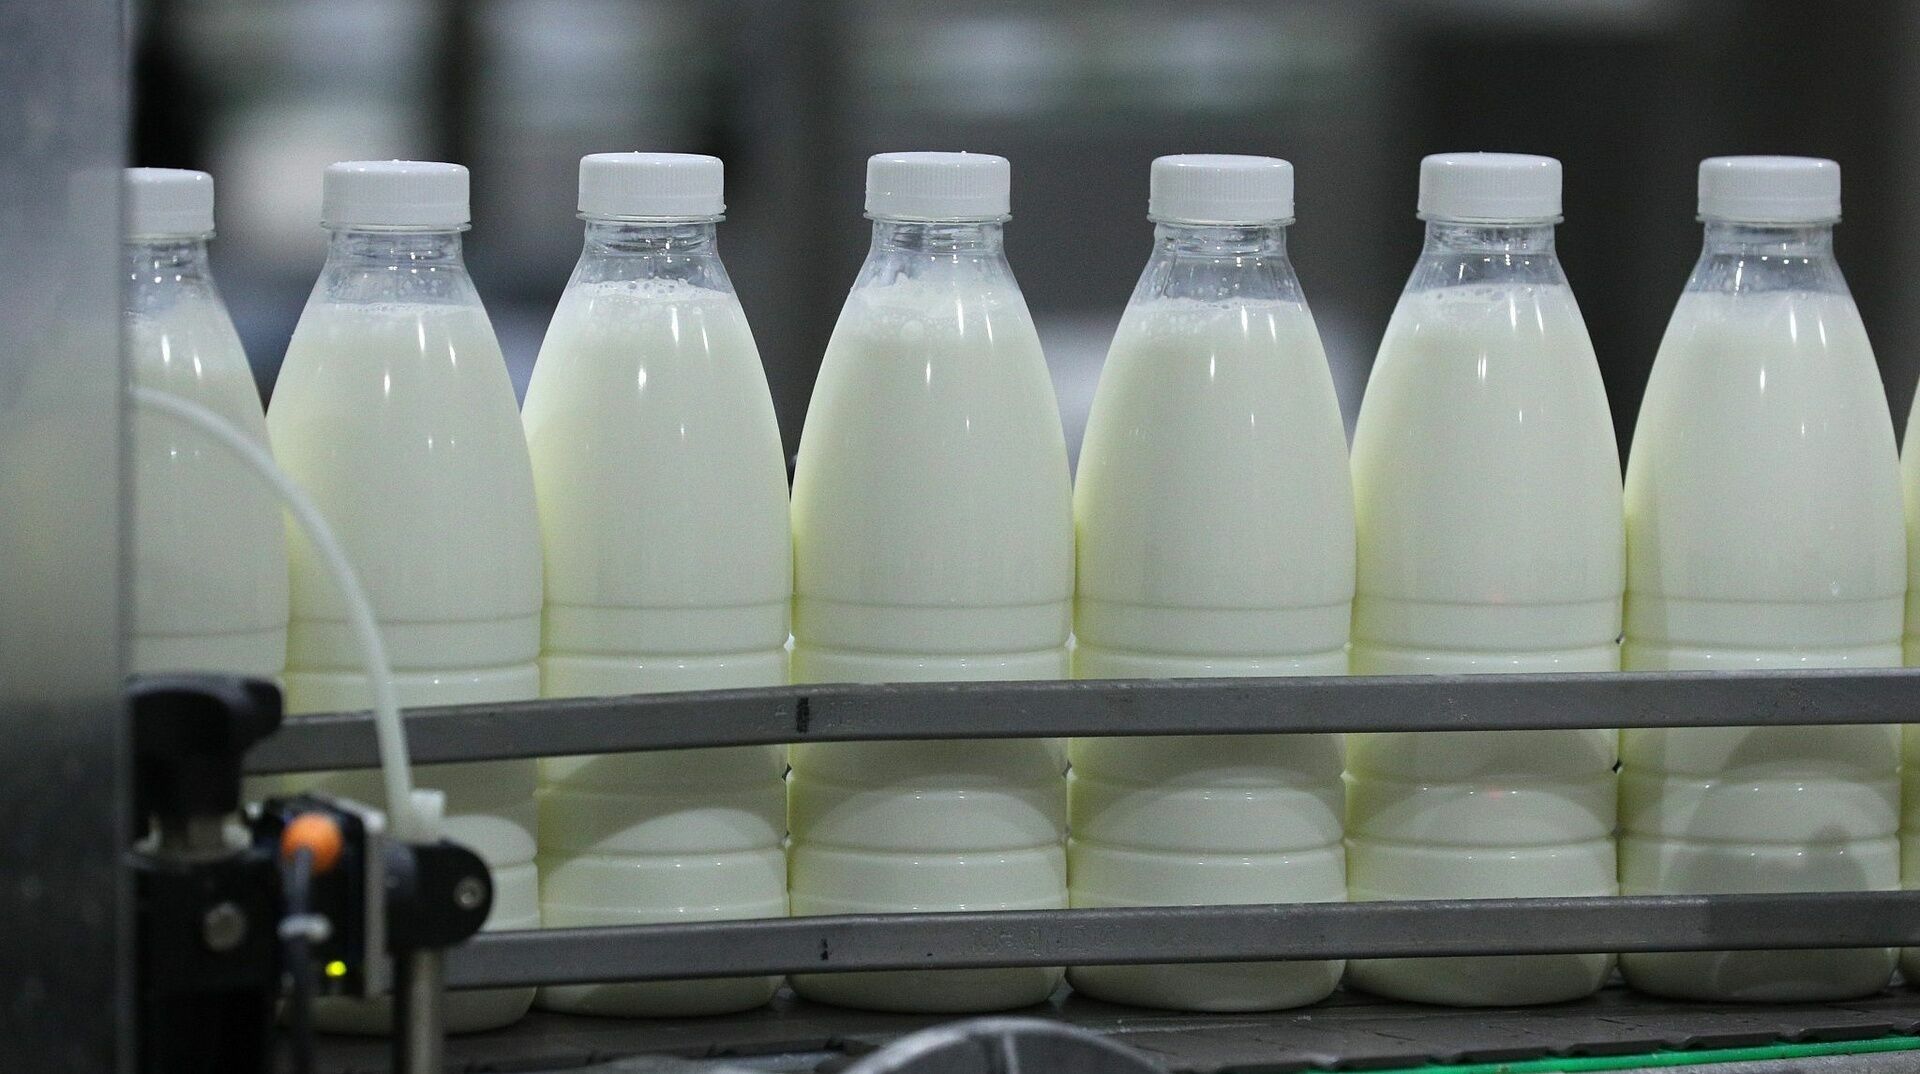 Milk producers warn of price increases in the fall